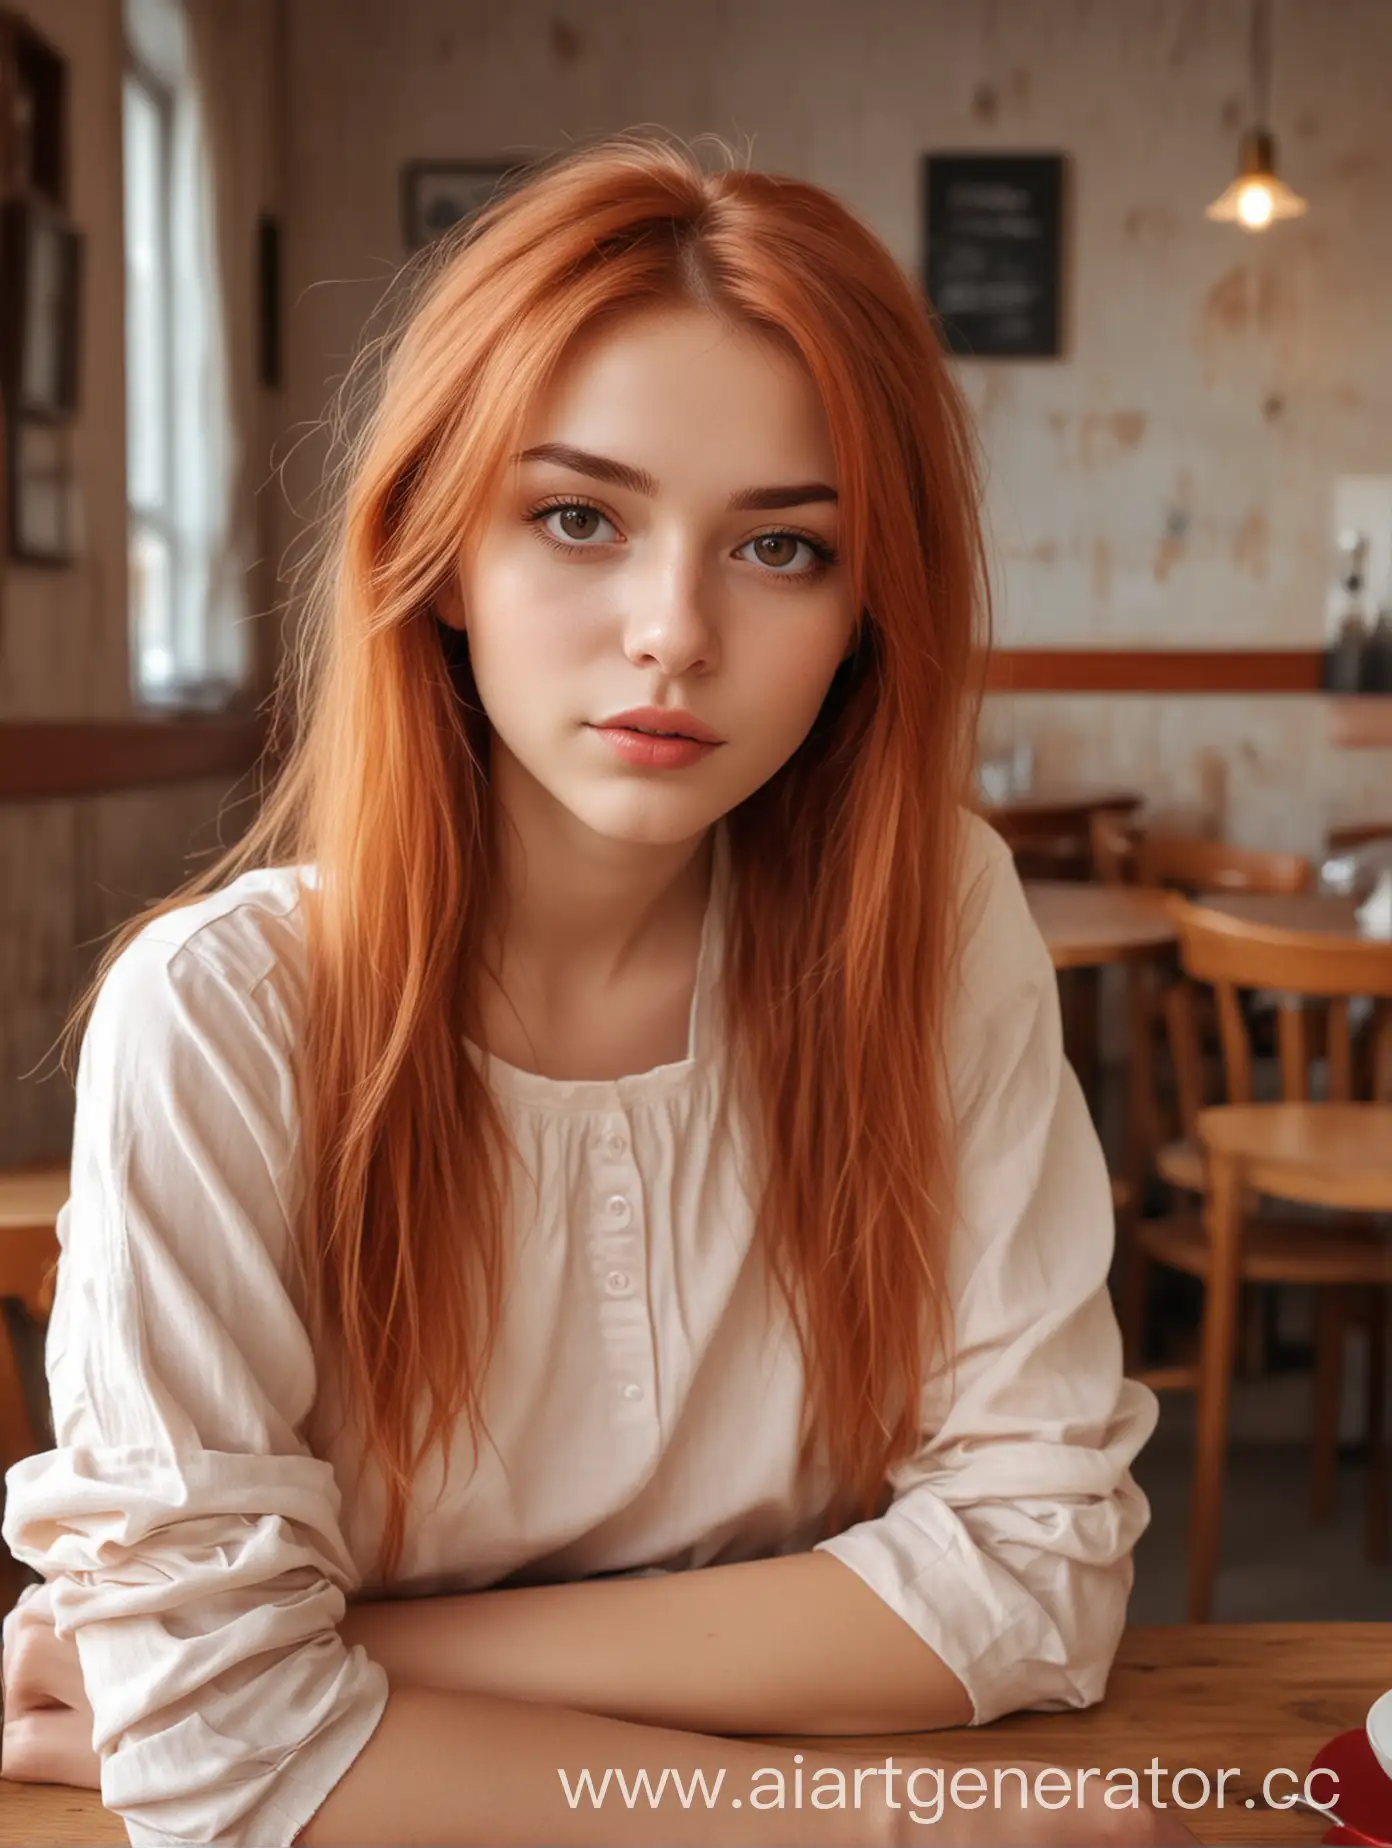 Fashionable-Slavic-Doppelganger-with-Brown-Eyes-in-Minimalist-Caf